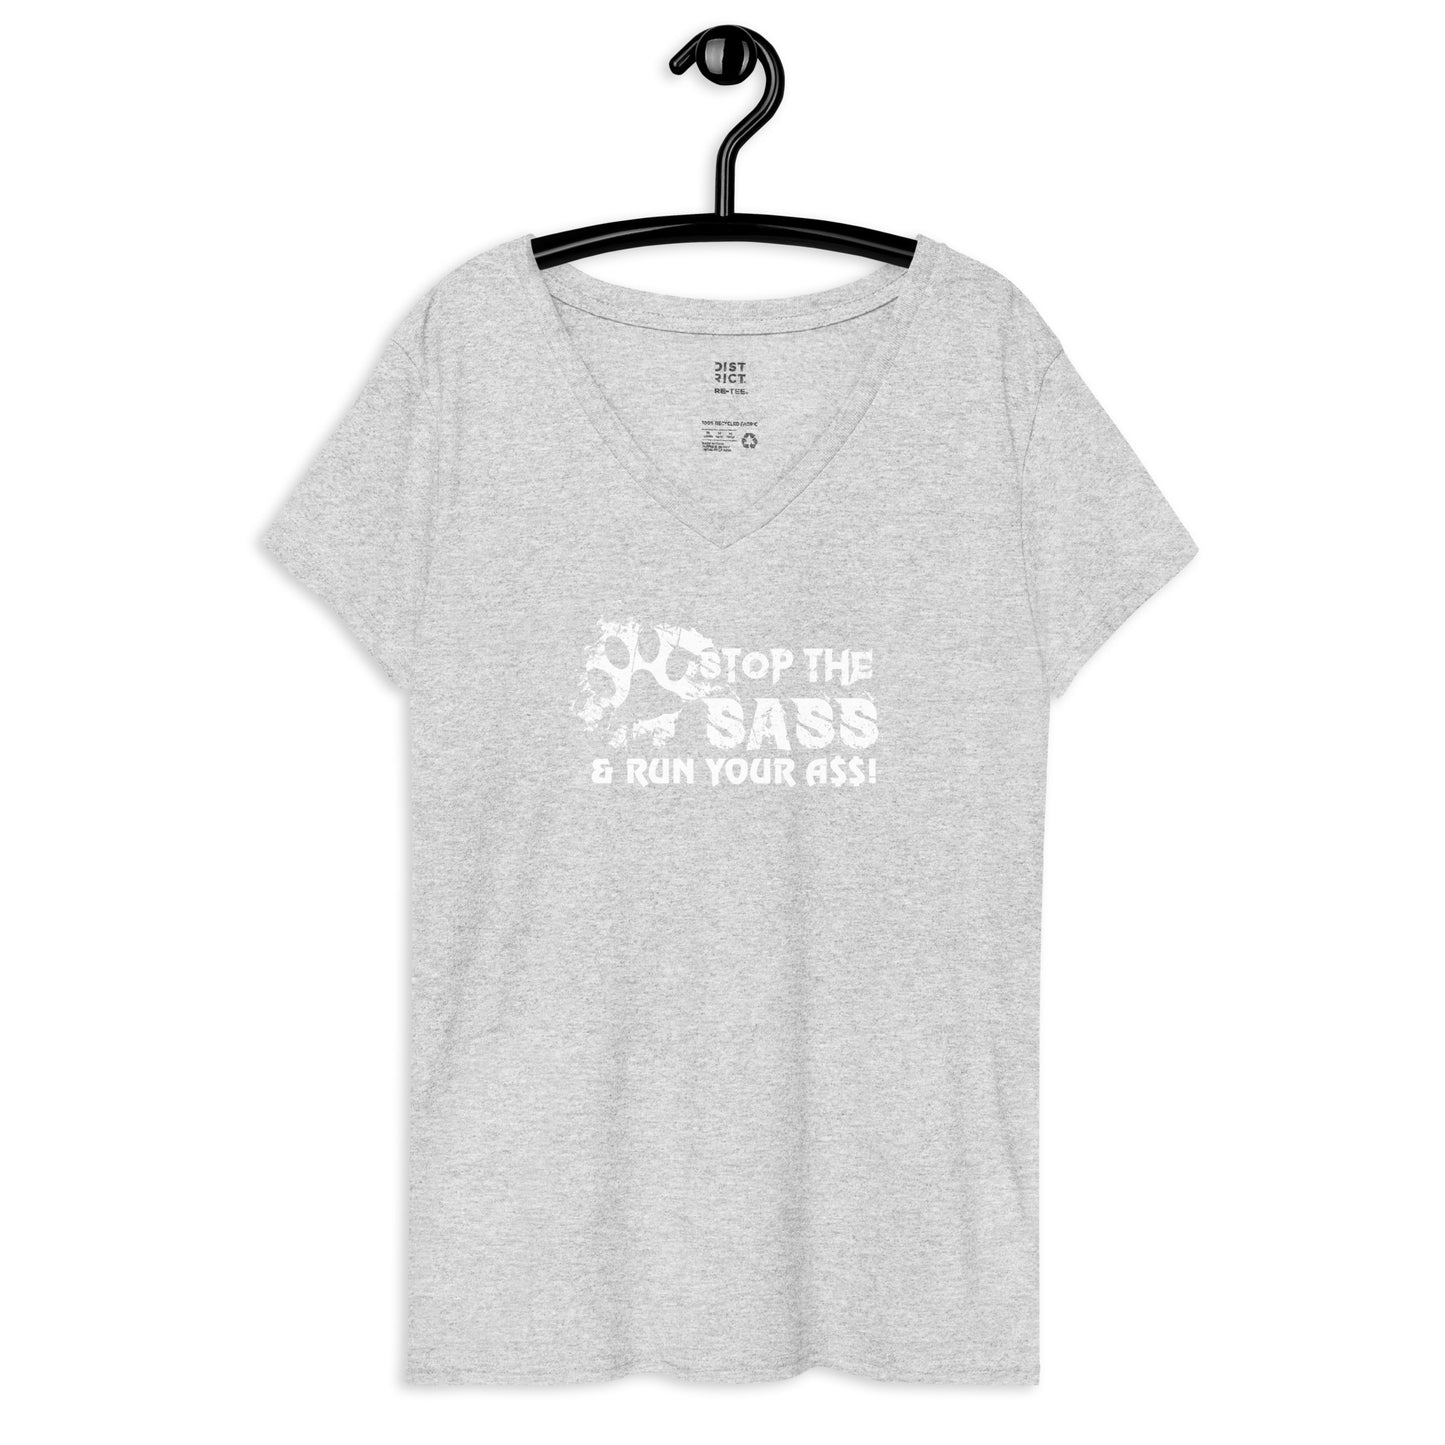 STOP THE SASS GRUNGE - Women’s recycled v-neck t-shirt